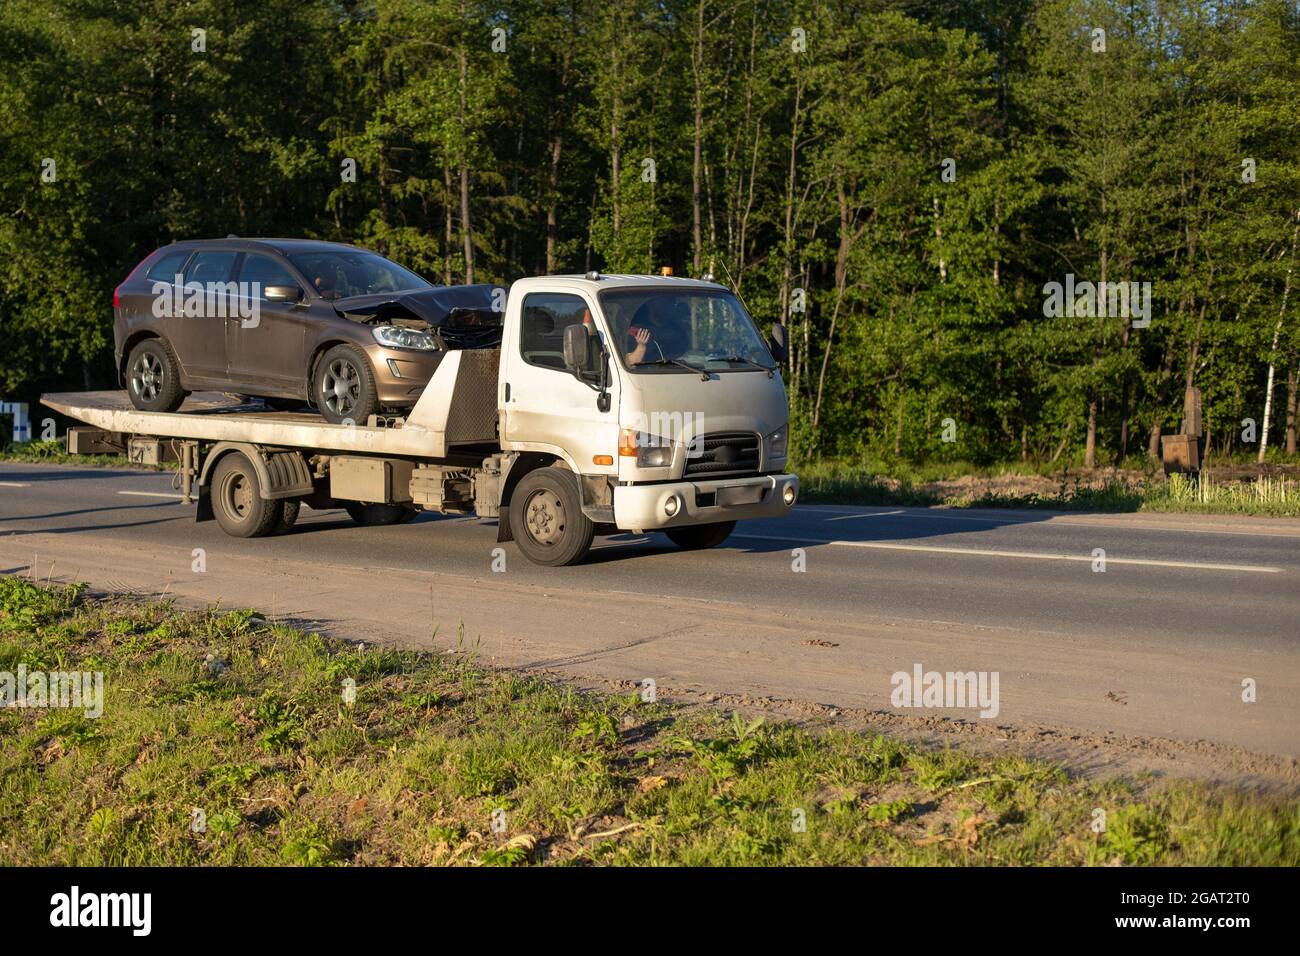 A tow truck is driving a car after an accident. Car transportation on a cargo platform. The loader takes away the emergency vehicle. Stock Photo